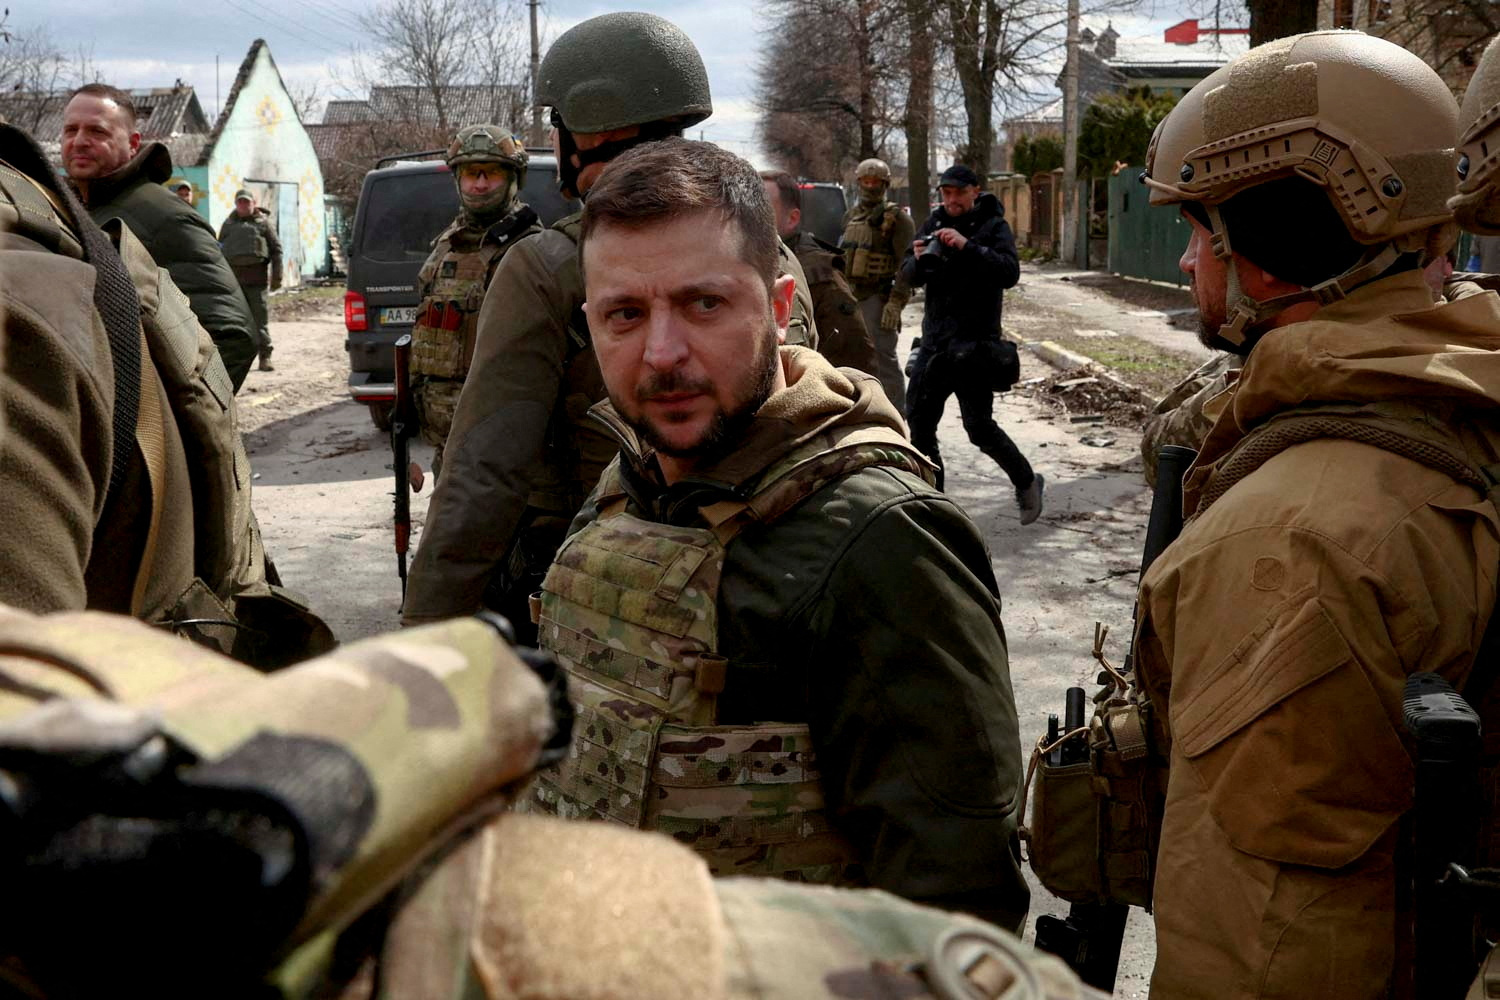 Photo: Ukraine's President Volodymyr Zelenskyy looks on as he is surrounded by Ukrainian servicemen as Russia's invasion of Ukraine continues, in Bucha, outside Kyiv, Ukraine, April 4, 2022. Credit: REUTERS/Marko Djurica